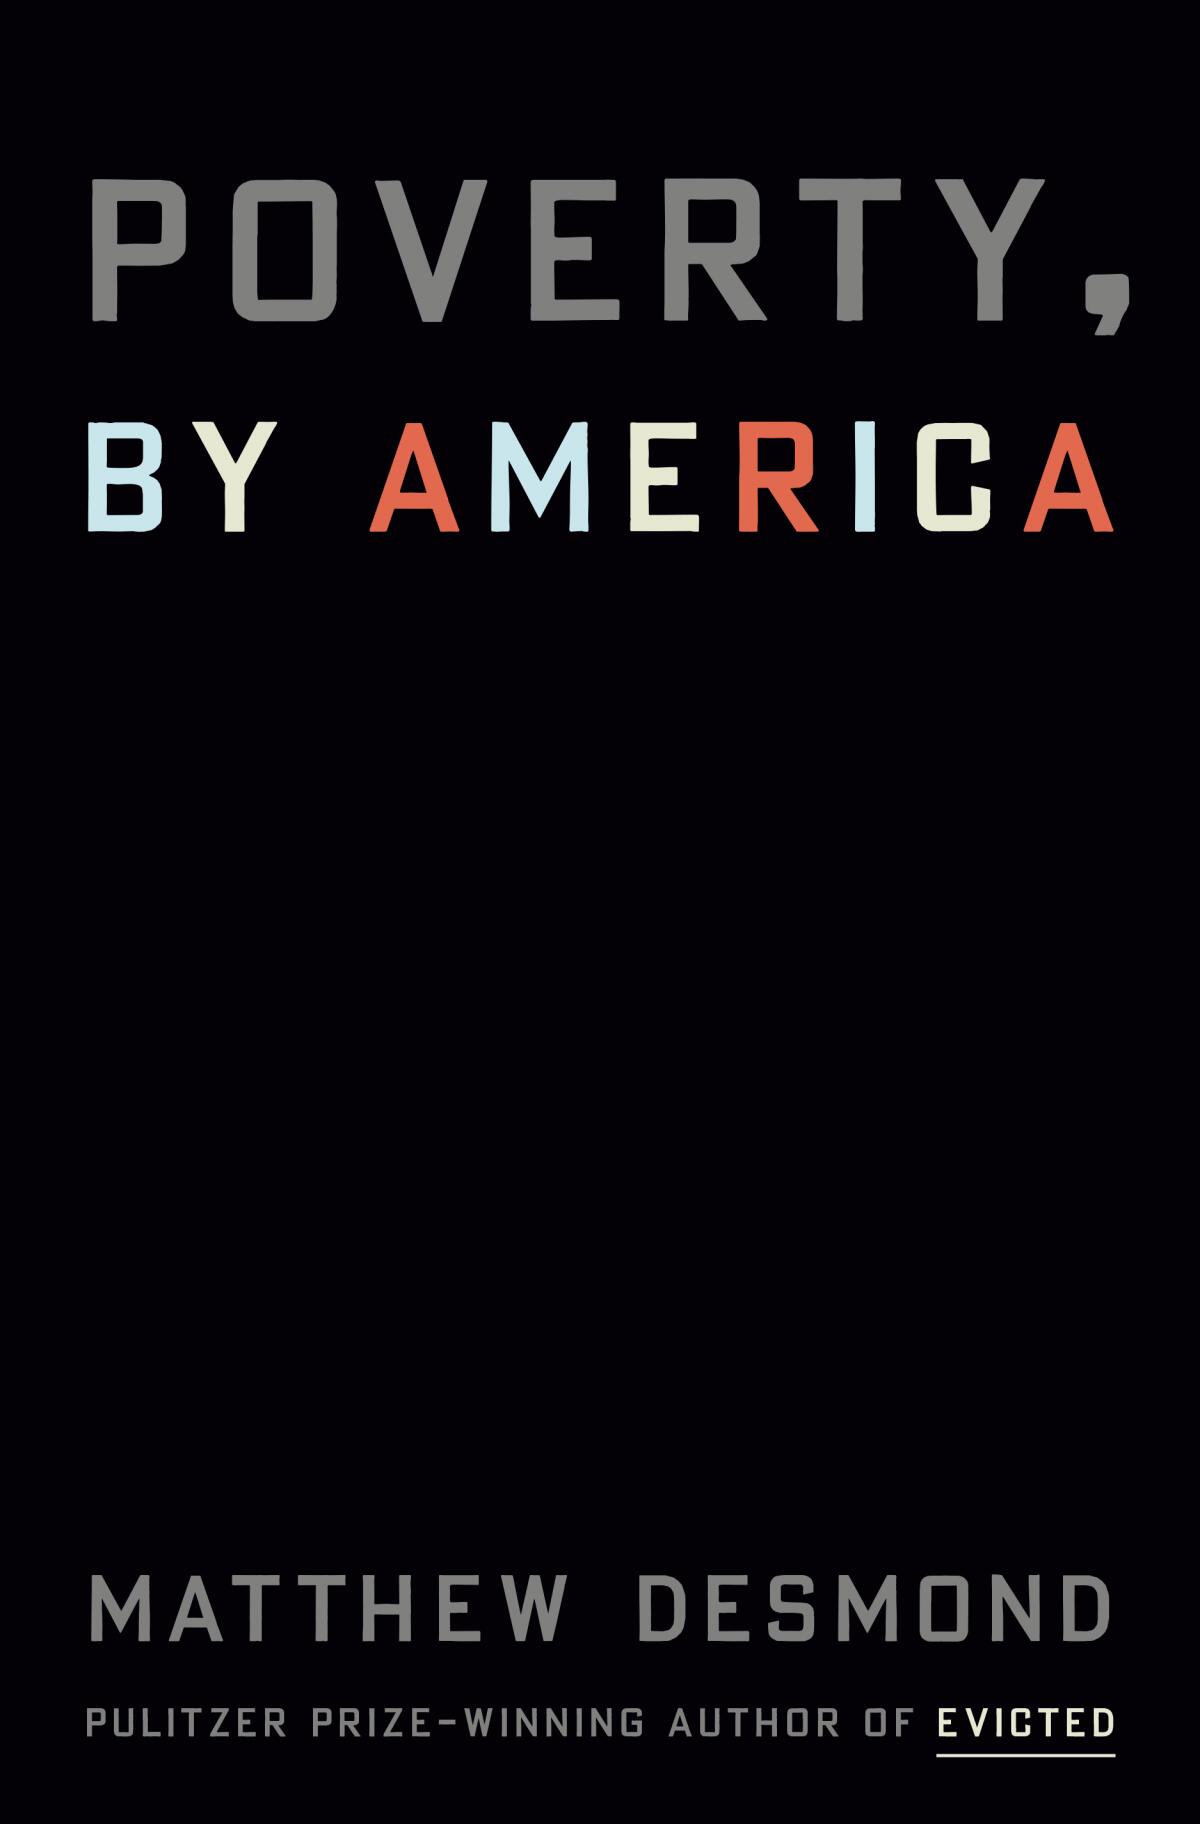 black book cover for Matthew Desmond's 'Poverty, by America.'